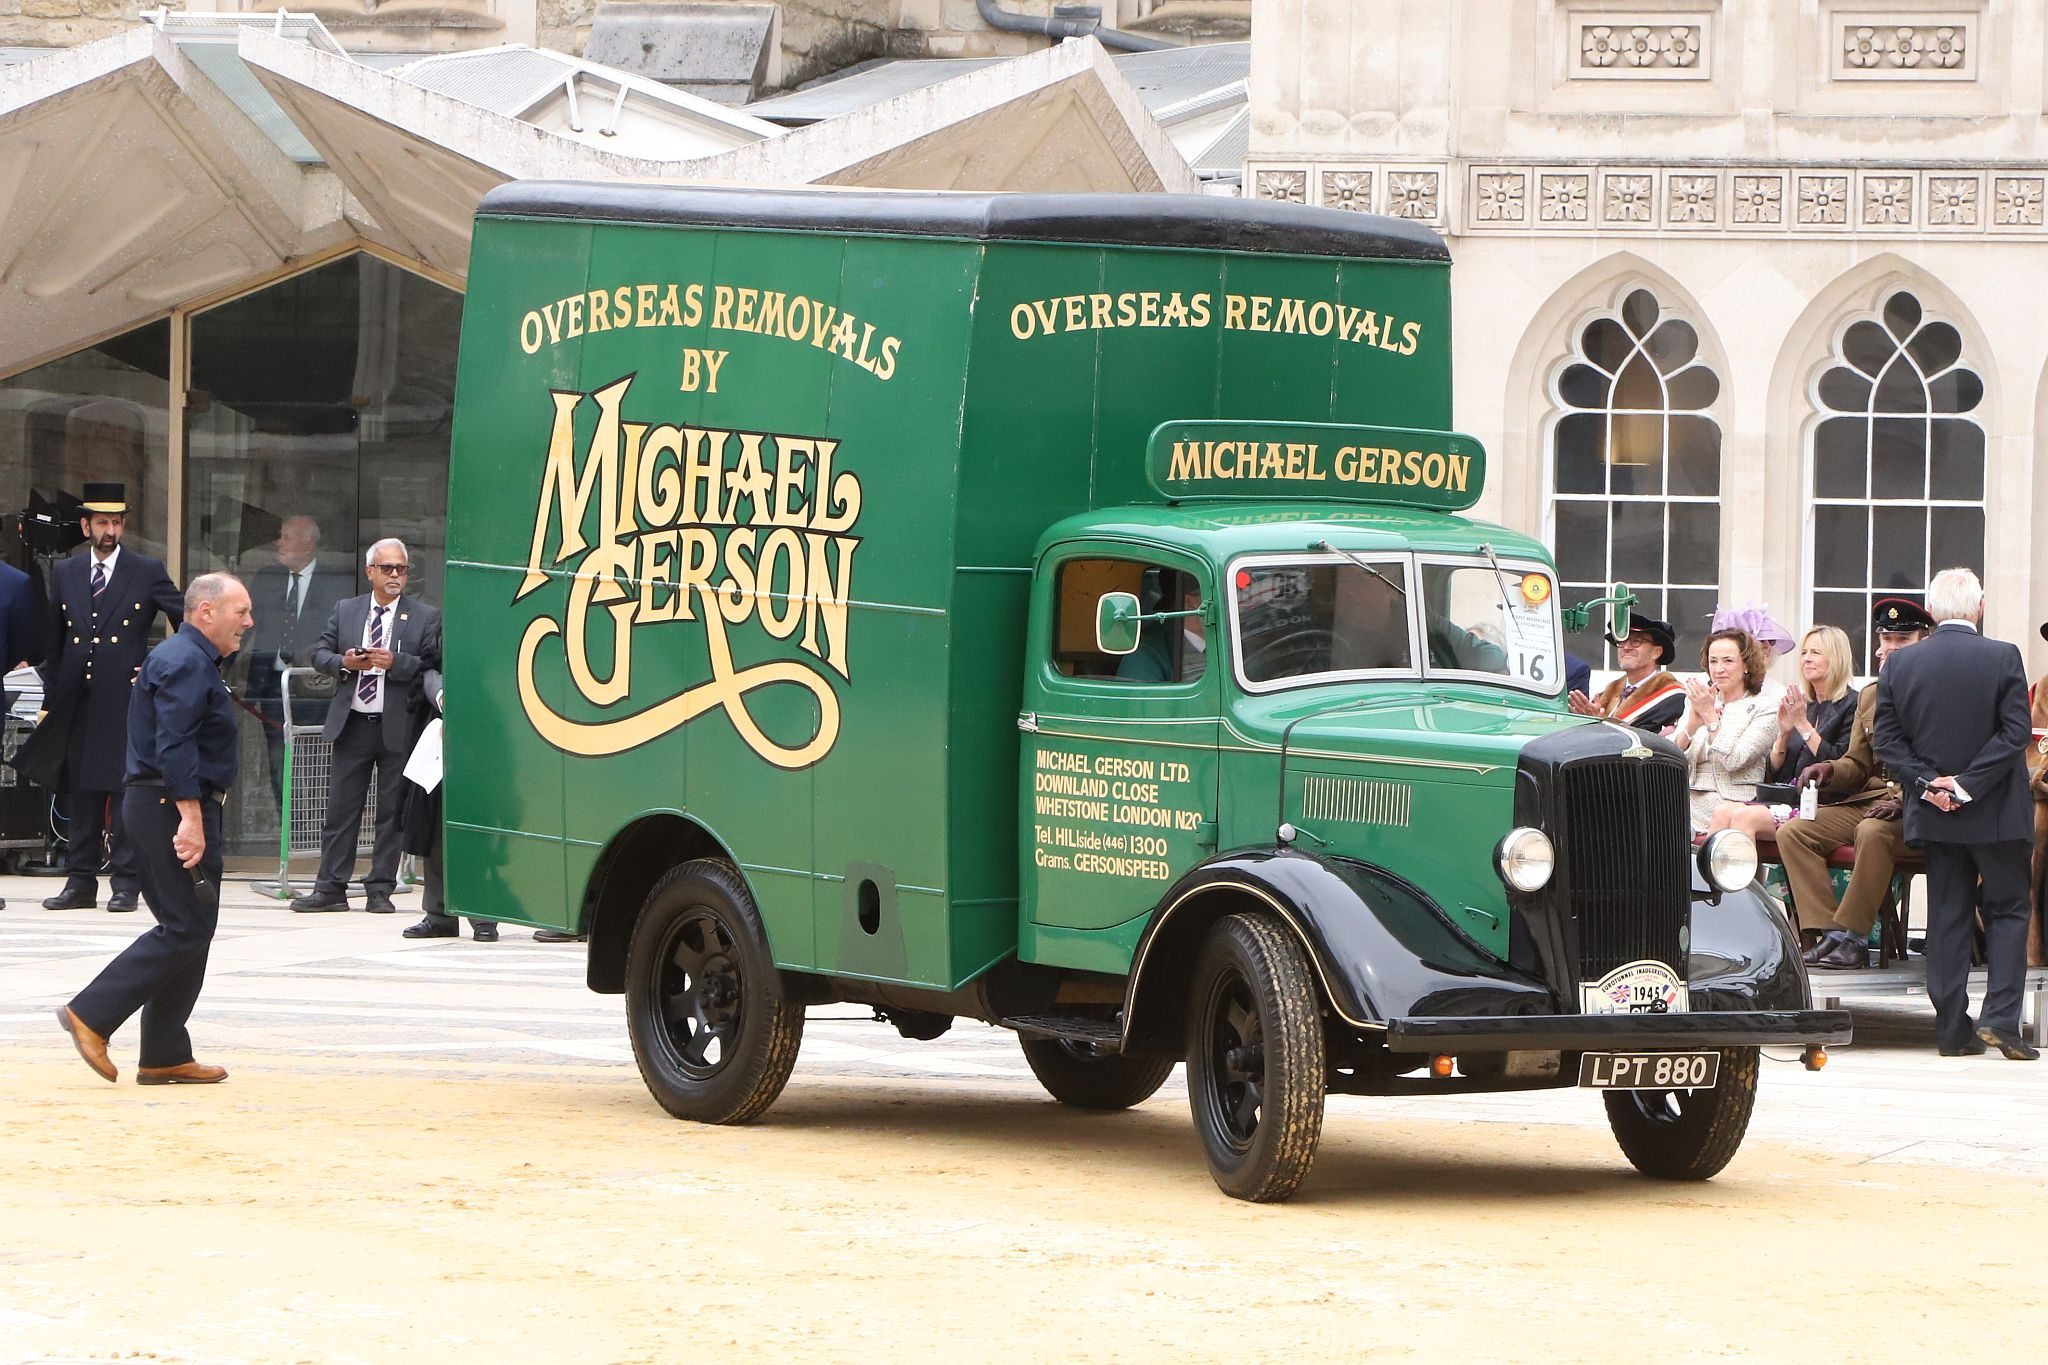 Morris Commercial 1949 LPT880. City of London 2023 Cart Marking in Guildhall Yard on 22-Jul-2023. Hosted by the Worshipful Company of Carmen with the Lord Mayor of the City of London in attendance. Wooden plates on the vehicles are branded with hot irons to allow them to ply for trade in the Square Mile. Another of the City Livery Company's annual ceremonies.